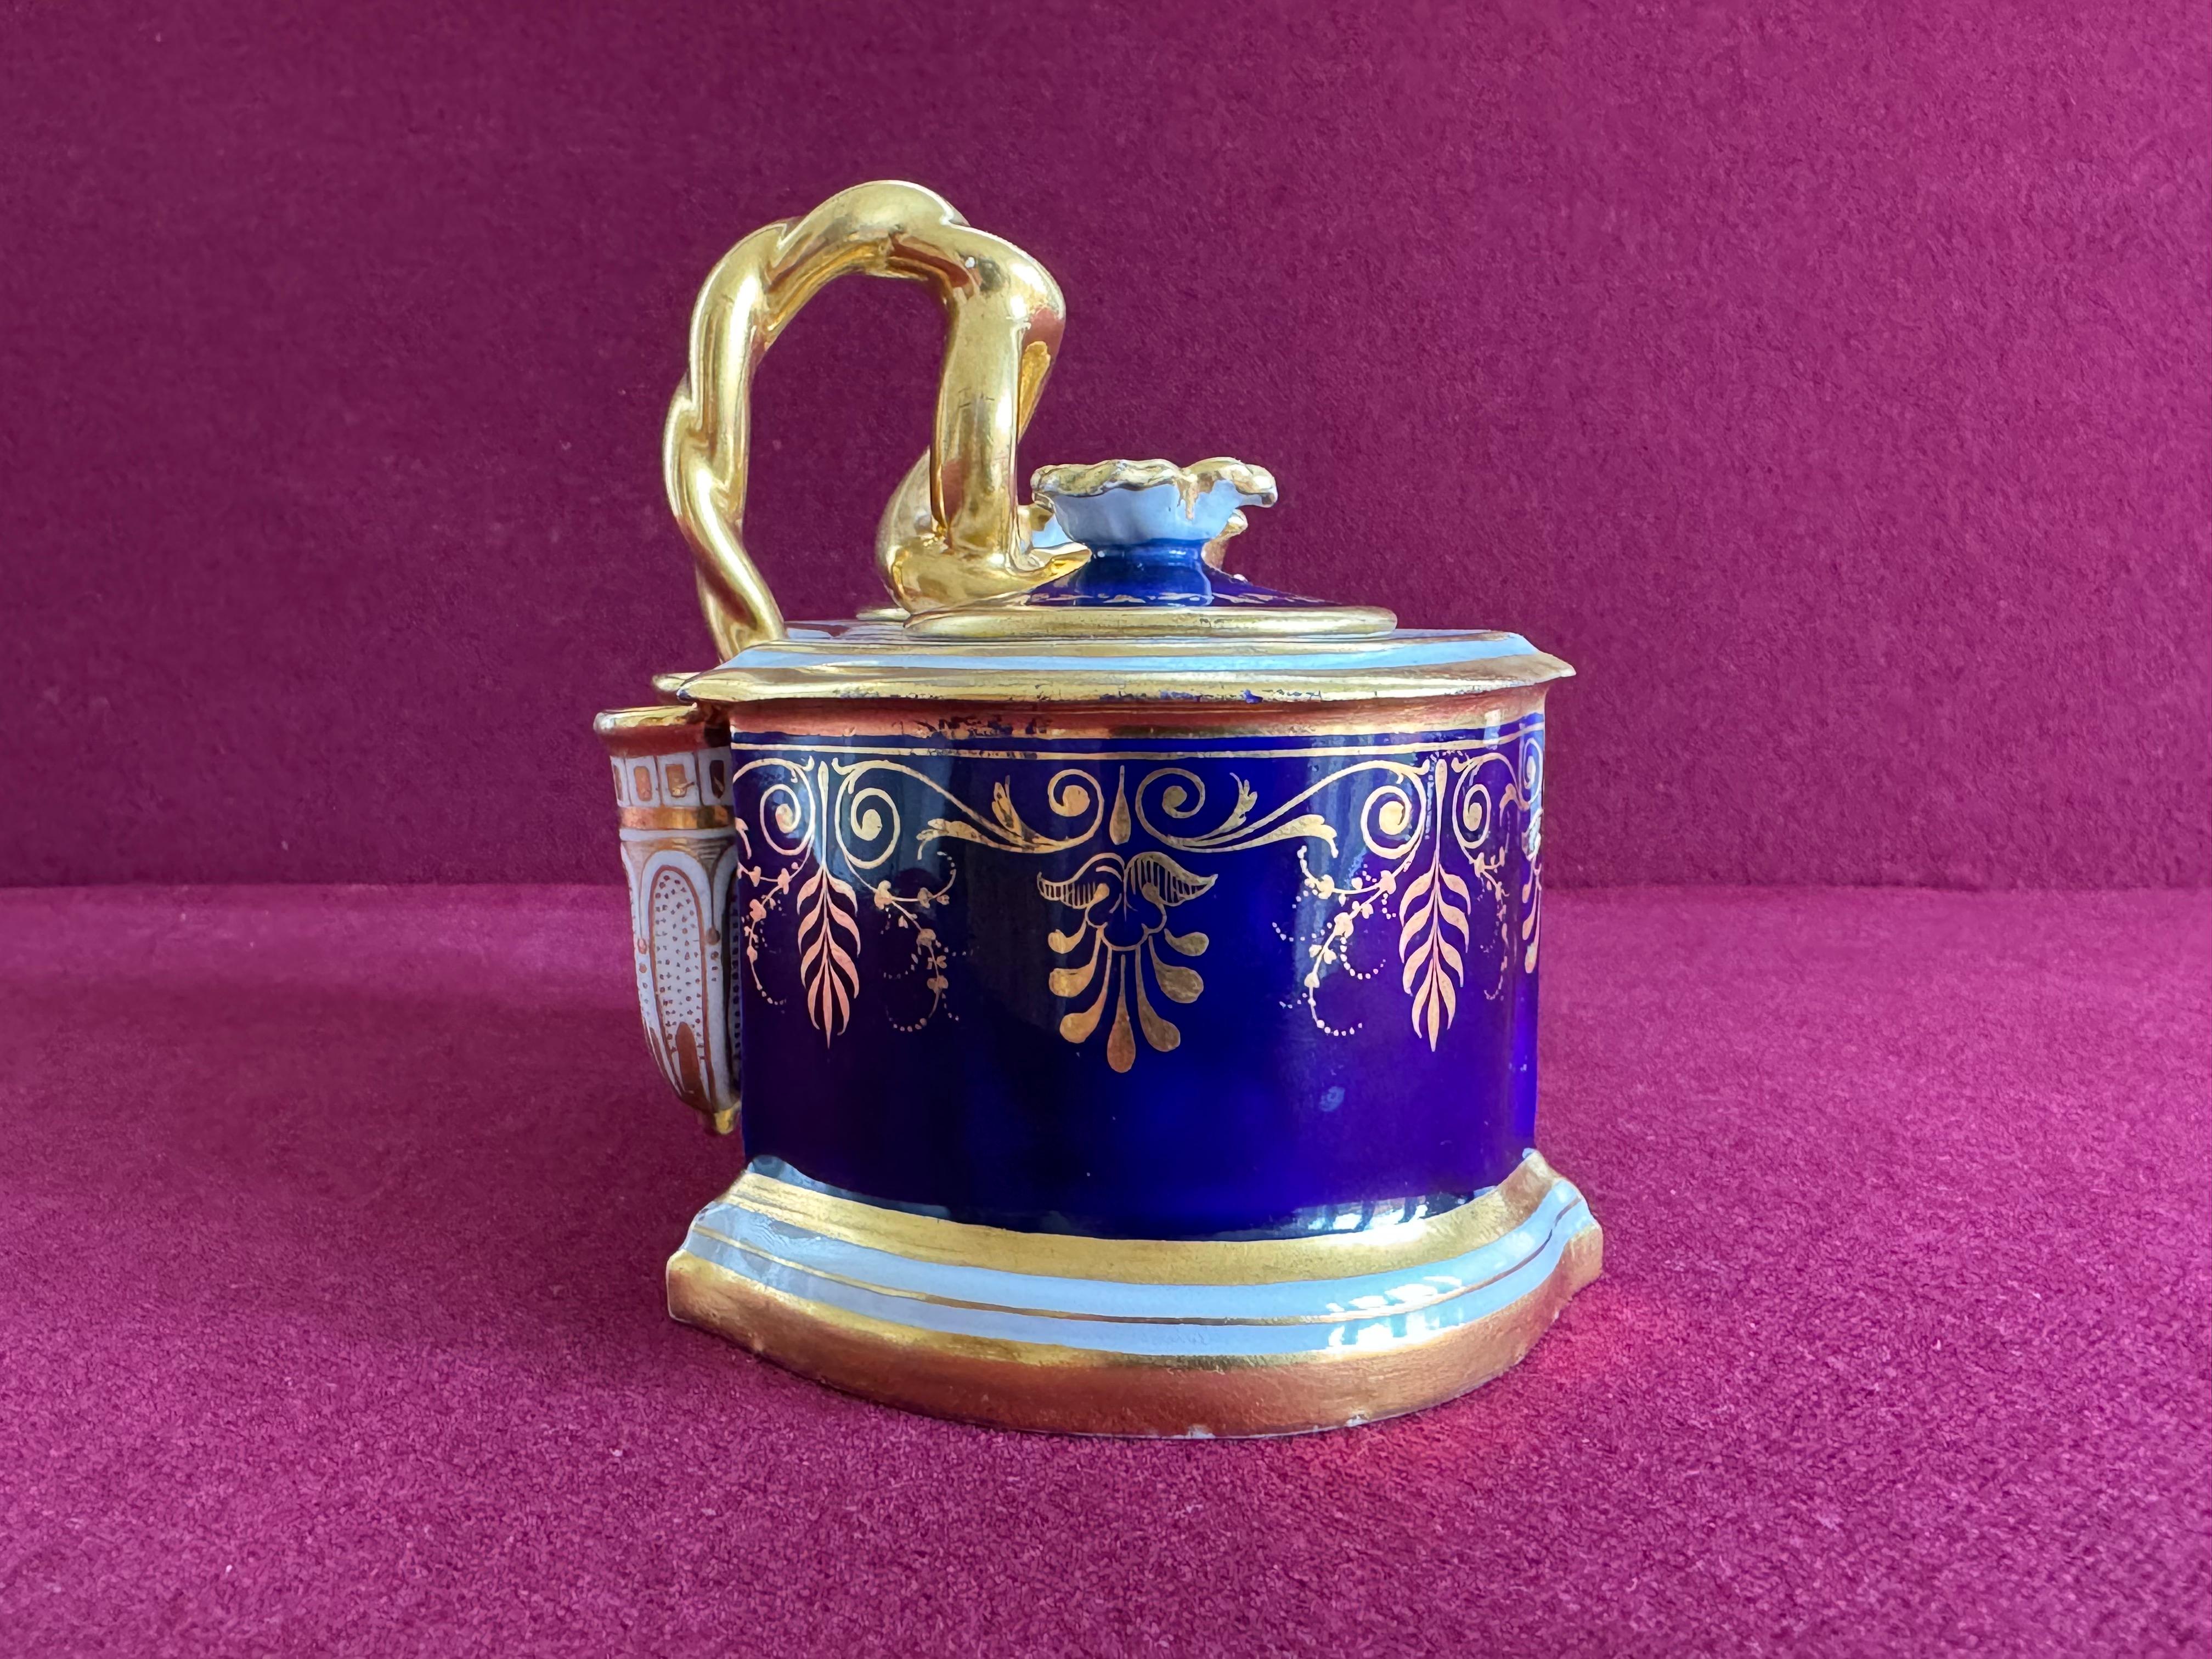 Hand-Painted A Flight, Barr and Barr Worcester Porcelain Inkstand c.1815-1820